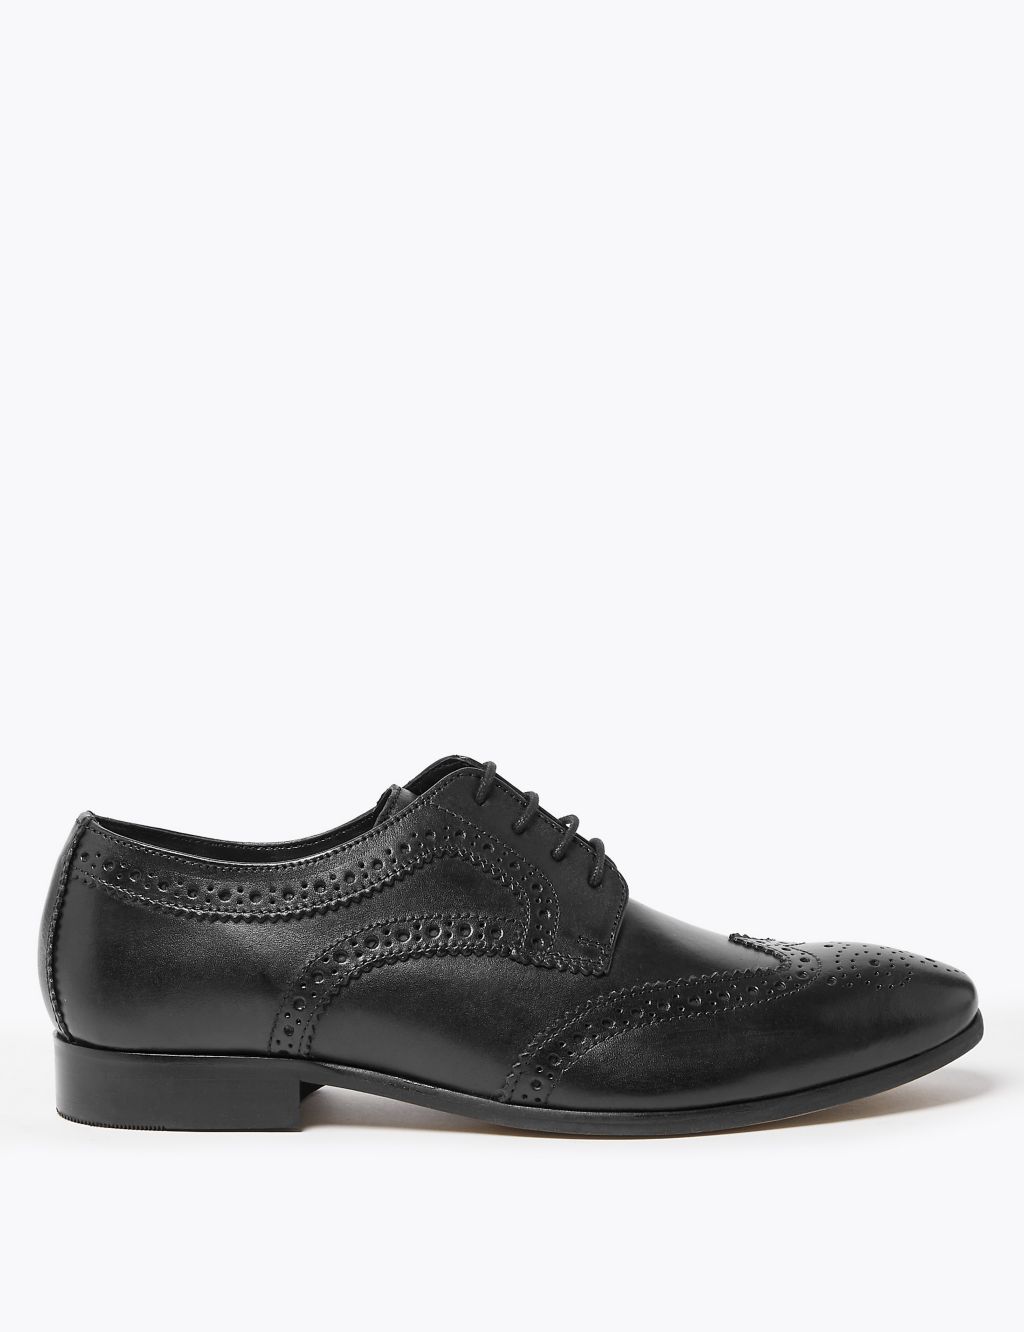 Wide Fit Leather Brogues image 1